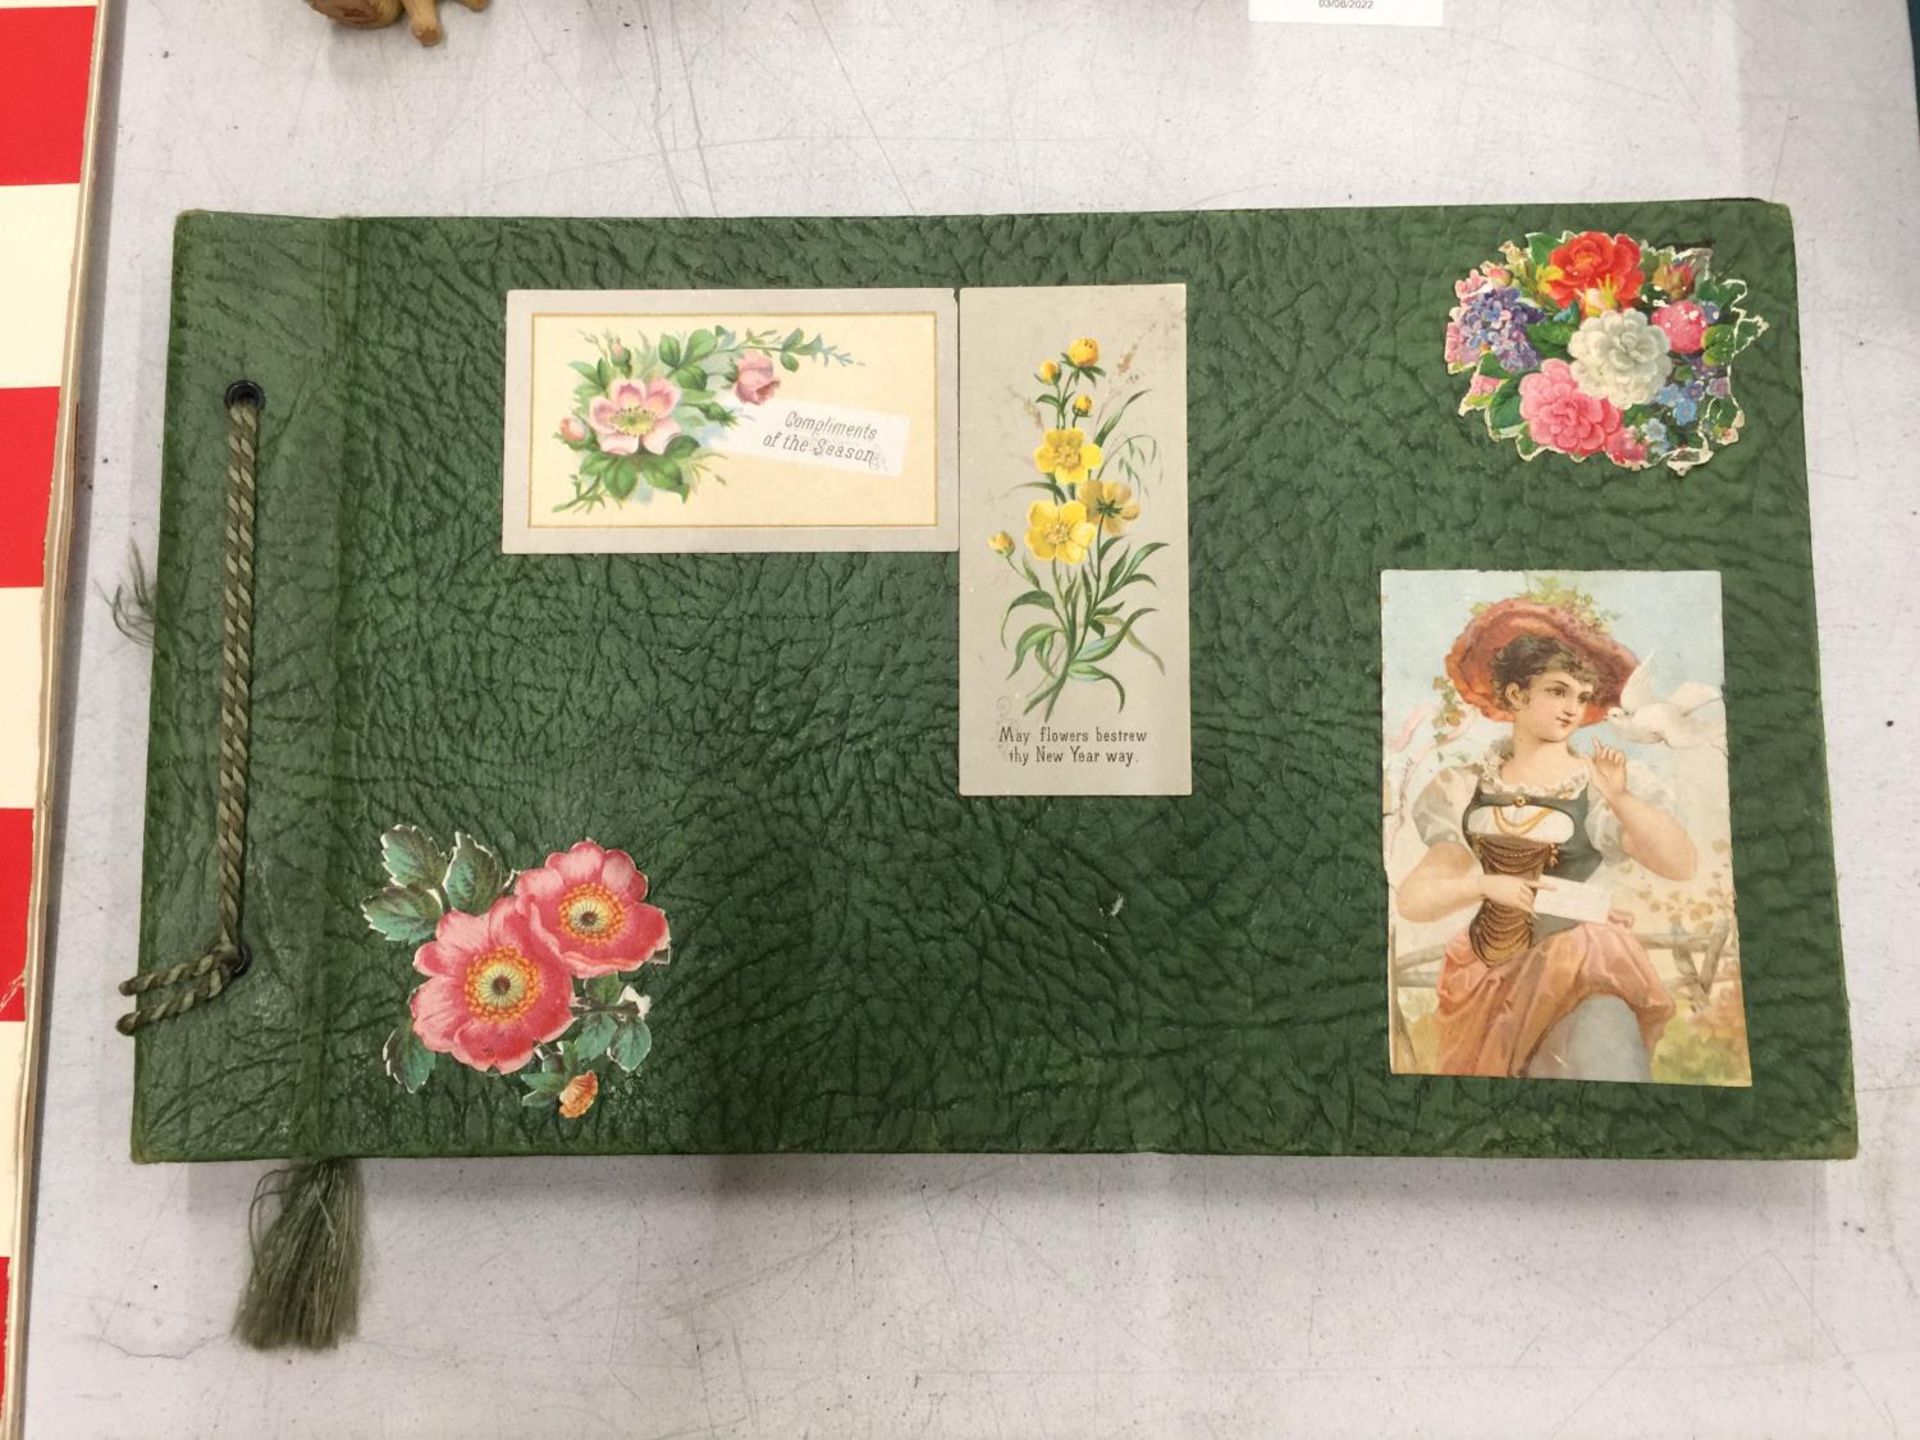 A VINTAGE SCRAPBOOK FILLED WITH VICTORIAN IMAGES